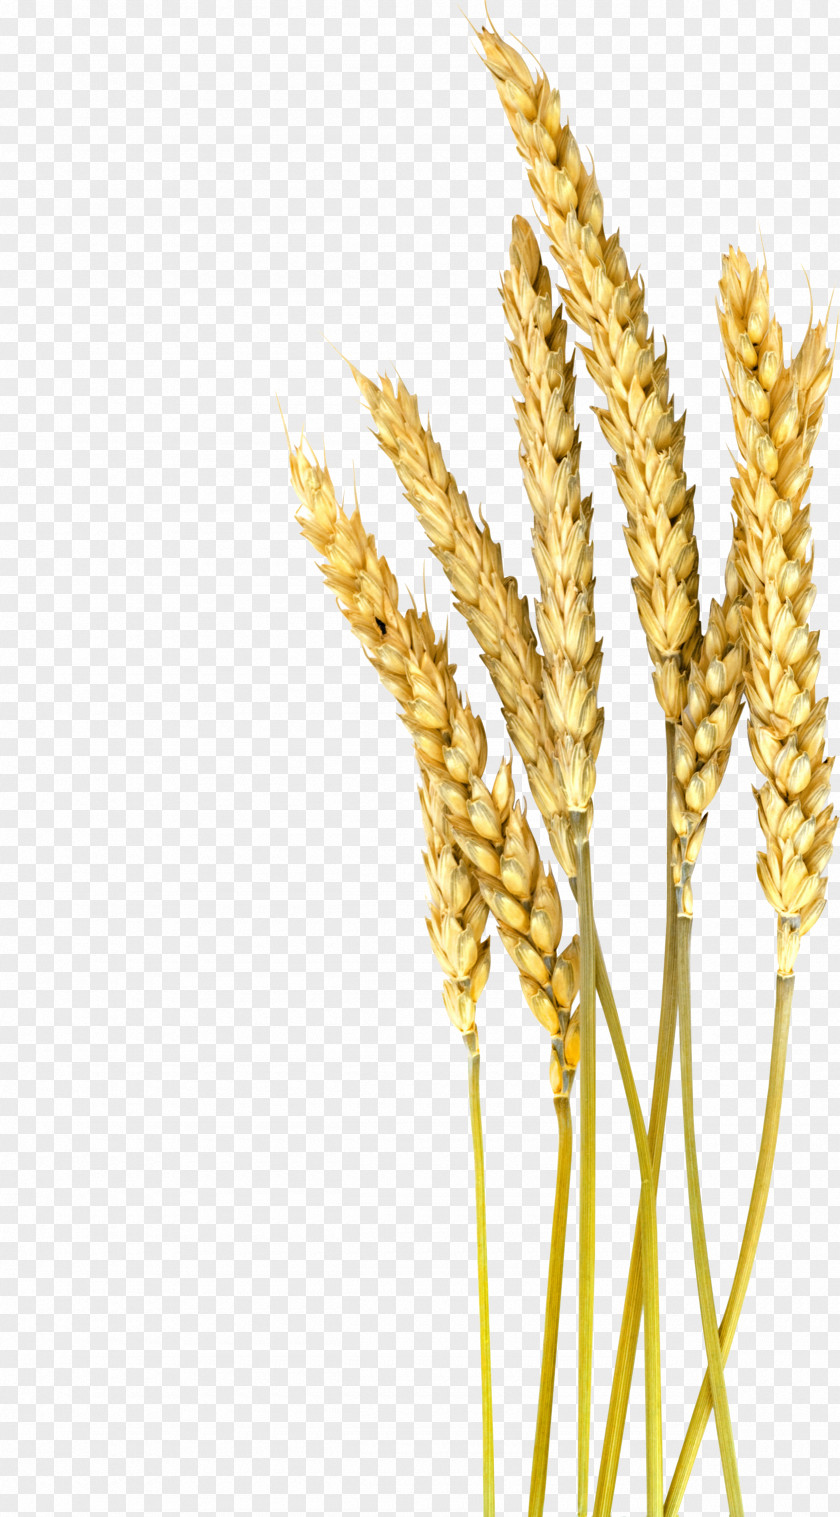 Wheat Einkorn Barley Cereal Oat Foxtail Millet PNG